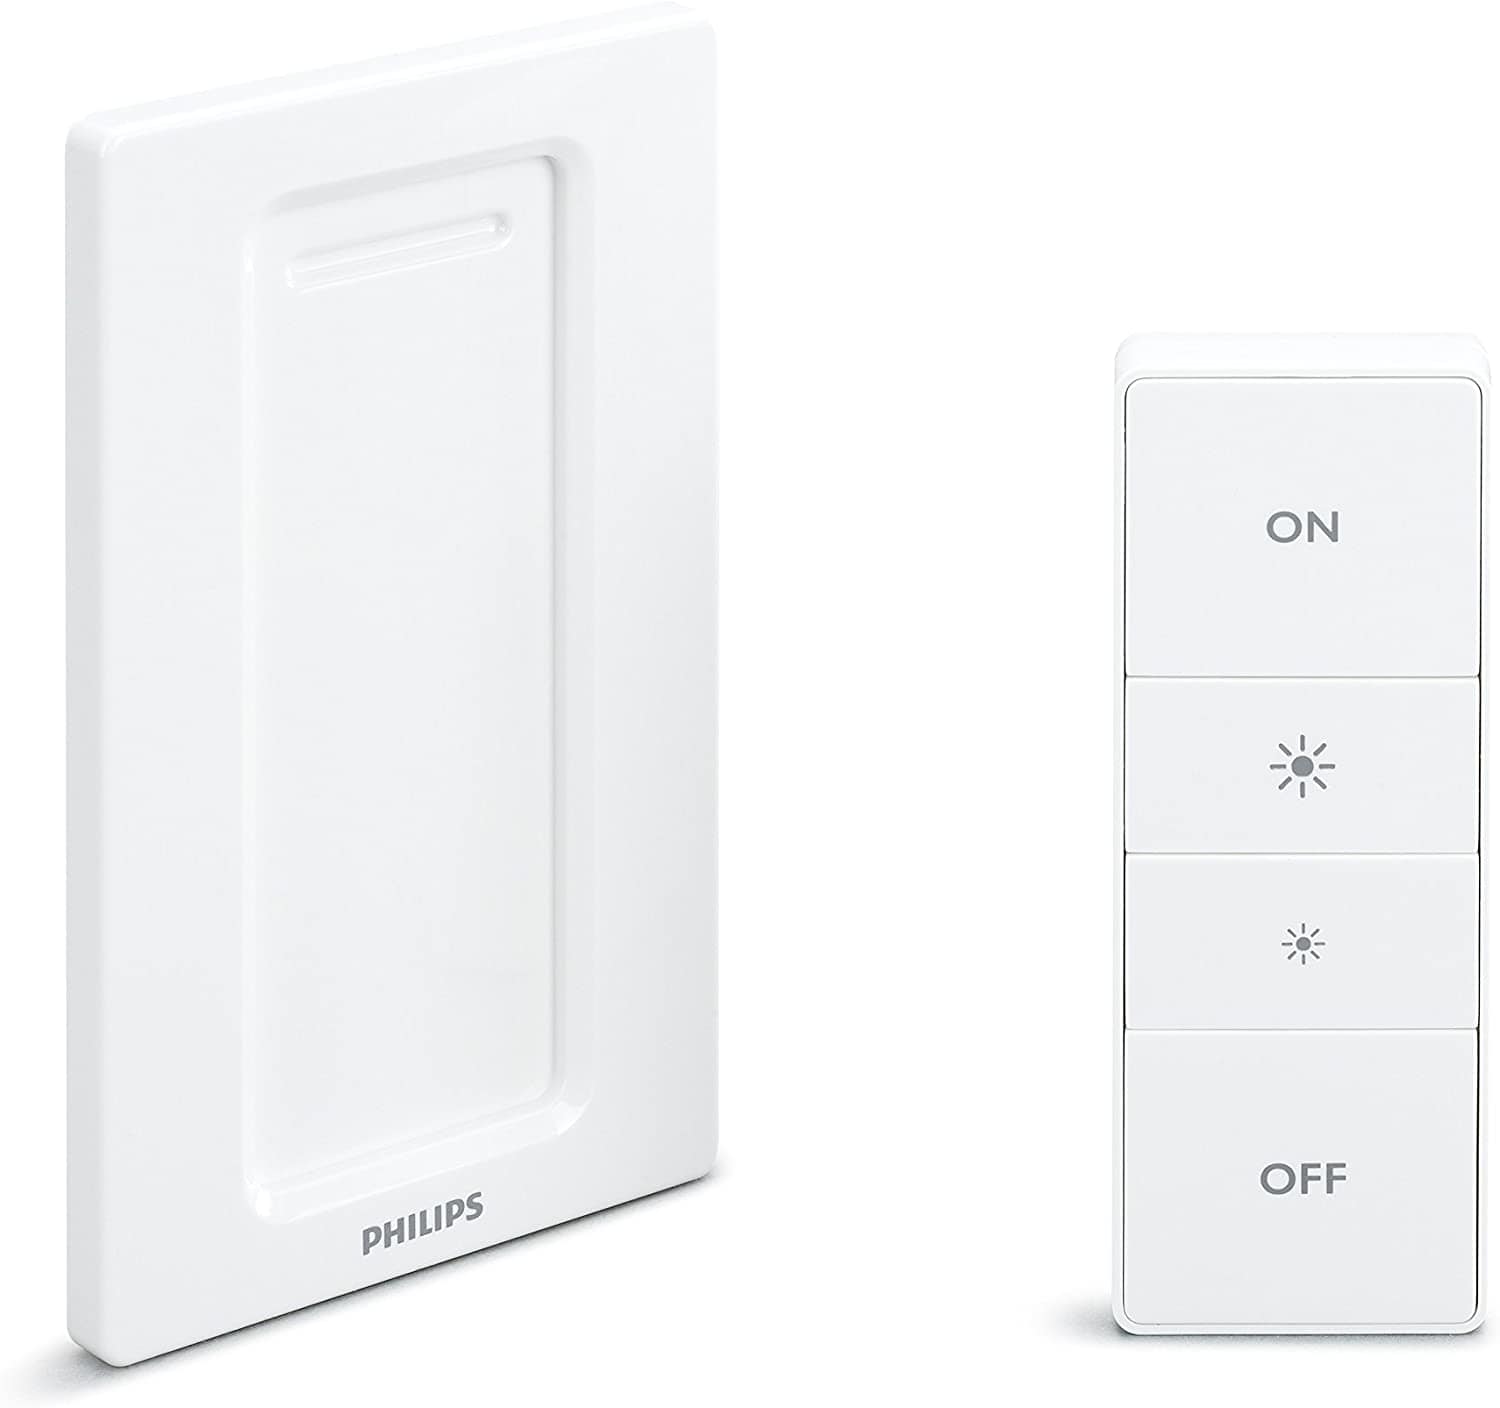 Philips Hue Smart Dimming lighting control is apple home kit compatible